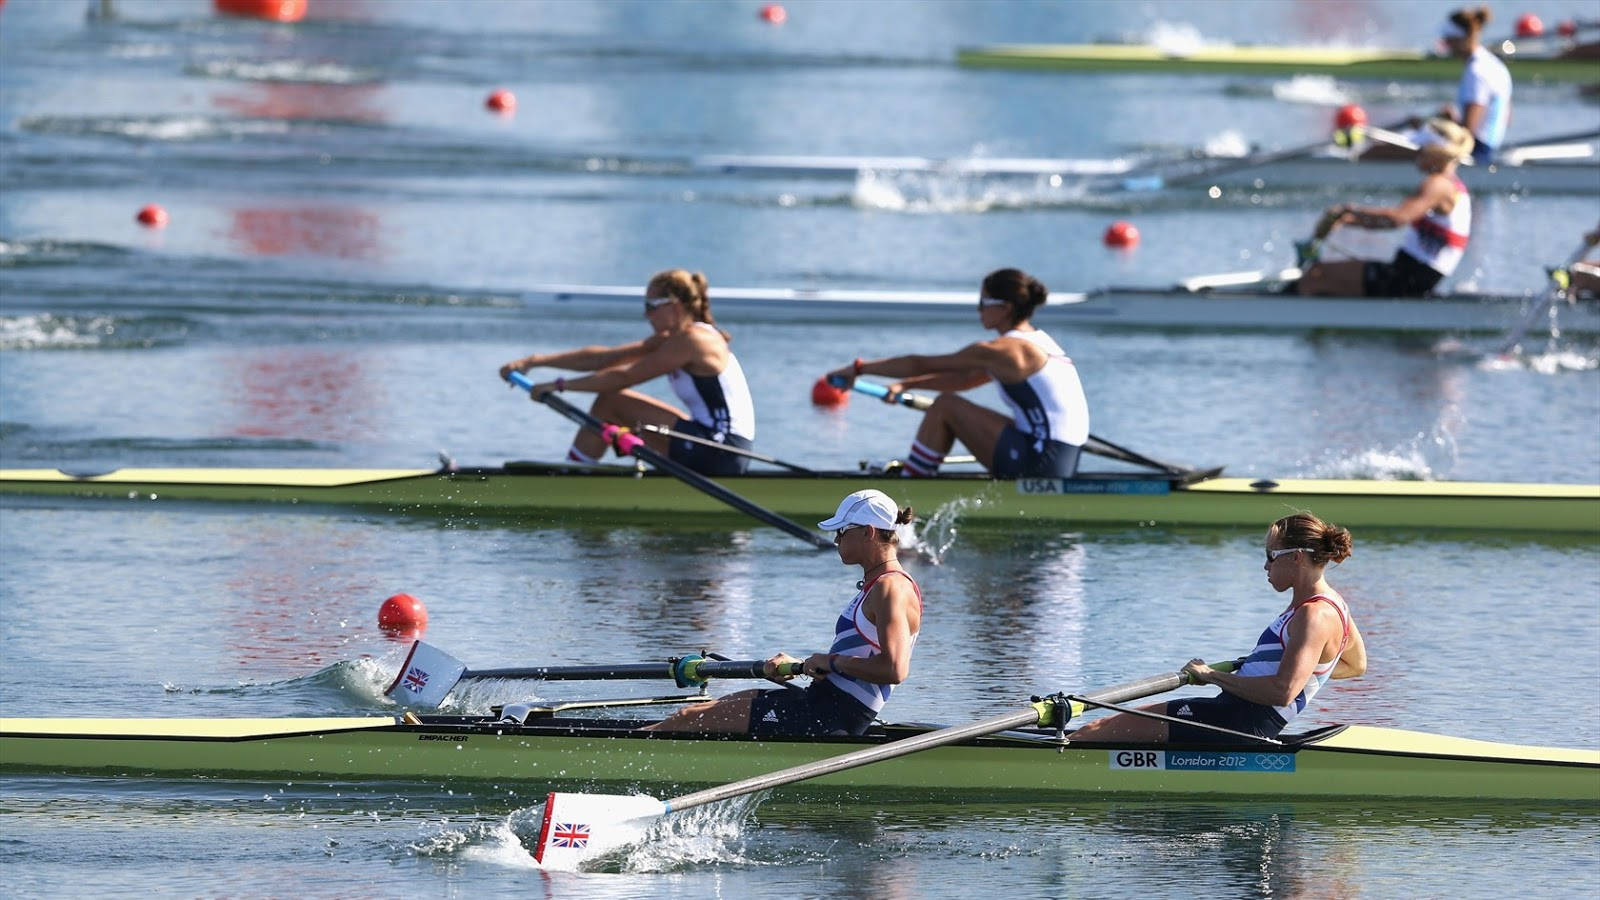 Coxless Pair Women's Rowing Competition Wallpaper